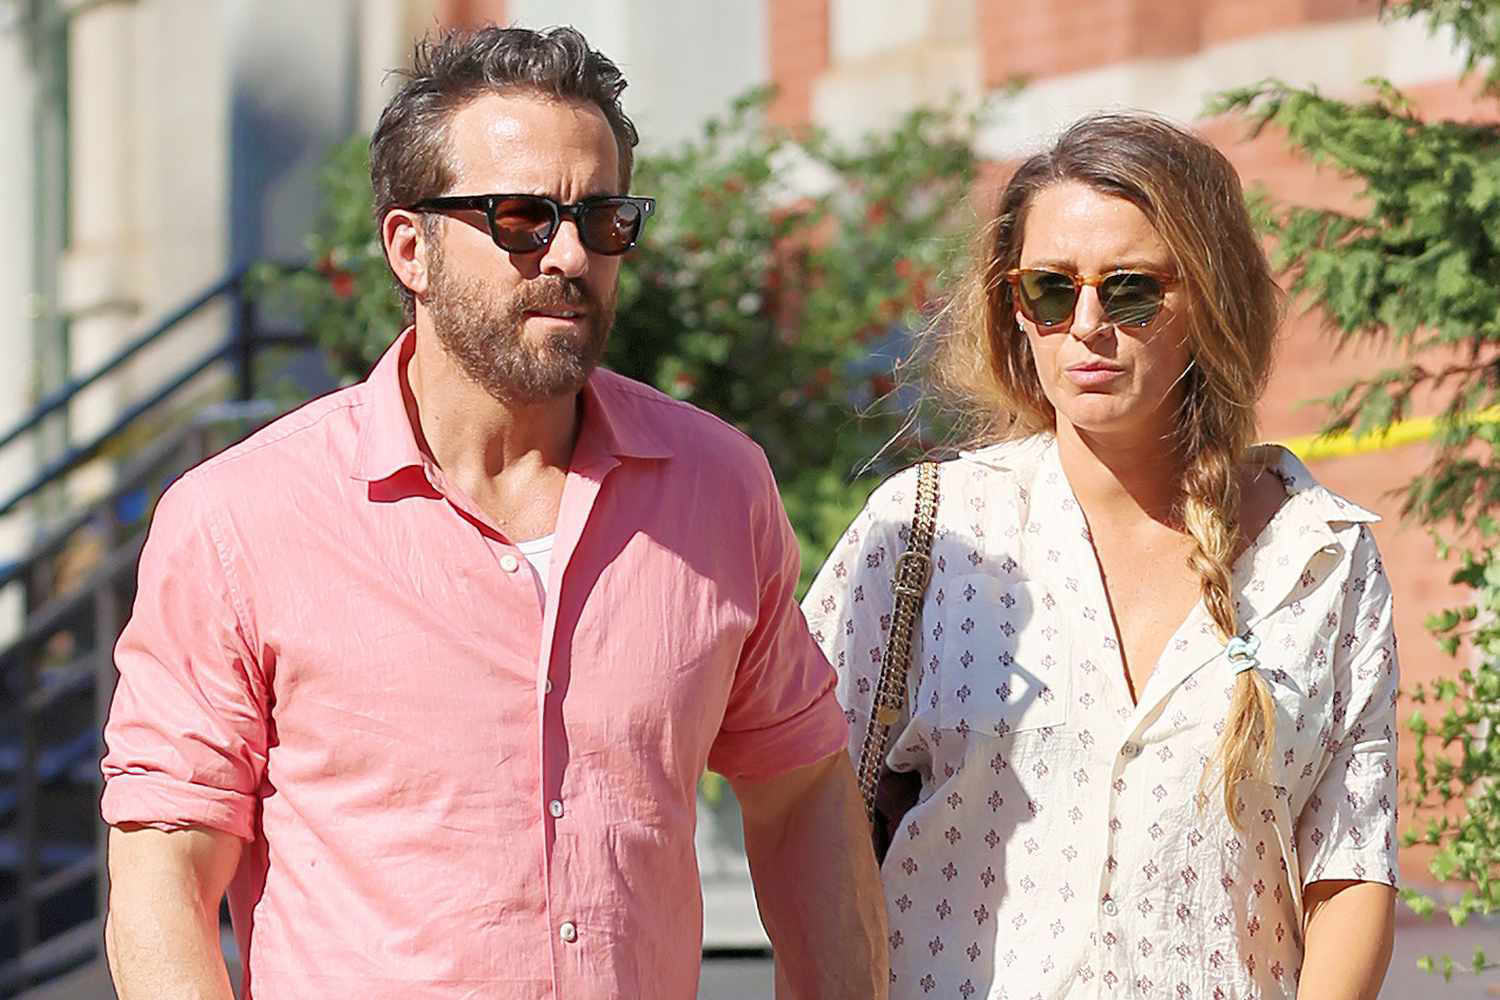 Blake Lively And Ryan Reynolds Have A Coordinating Couples Outing In Cool Button Downs Ahead Of 